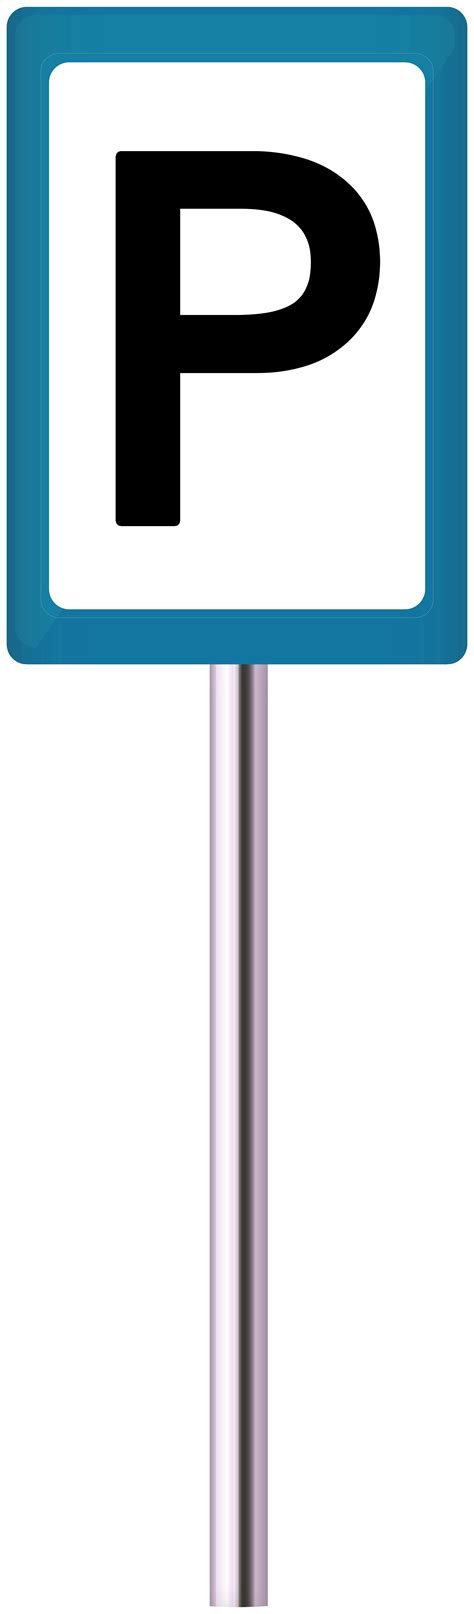 parking sign clip art   cliparts  images  clipground